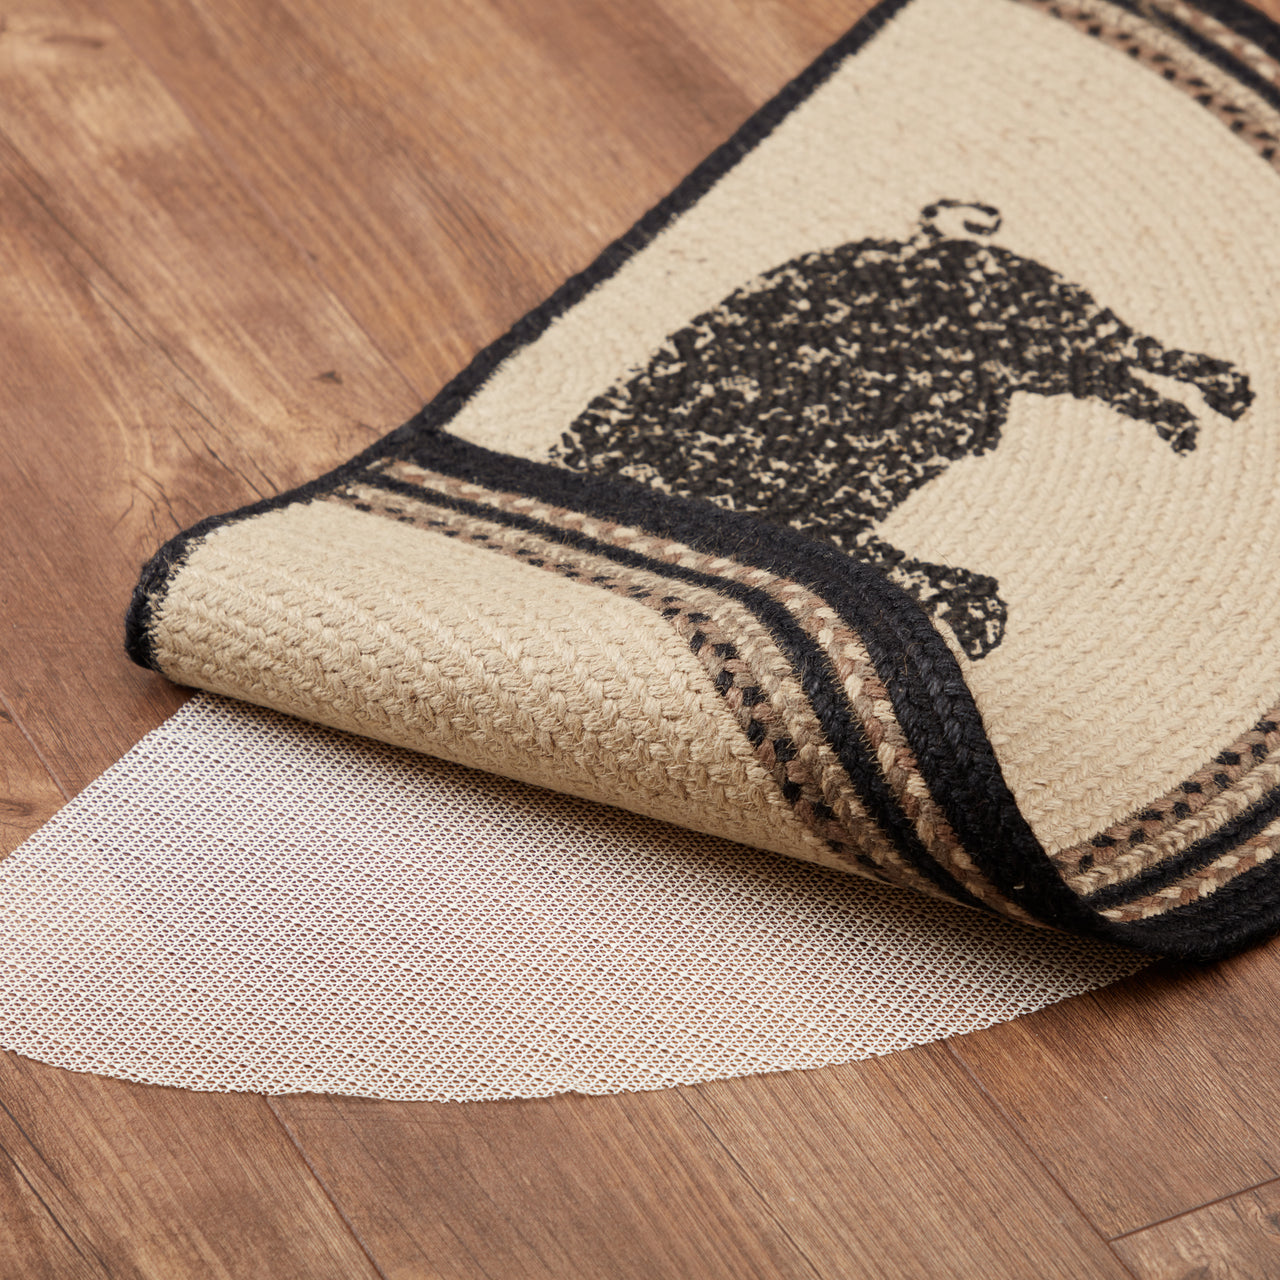 Sawyer Mill Charcoal Pig Jute Braided Rug Half Circle with Rug Pad 16.5"x33" VHC Brands